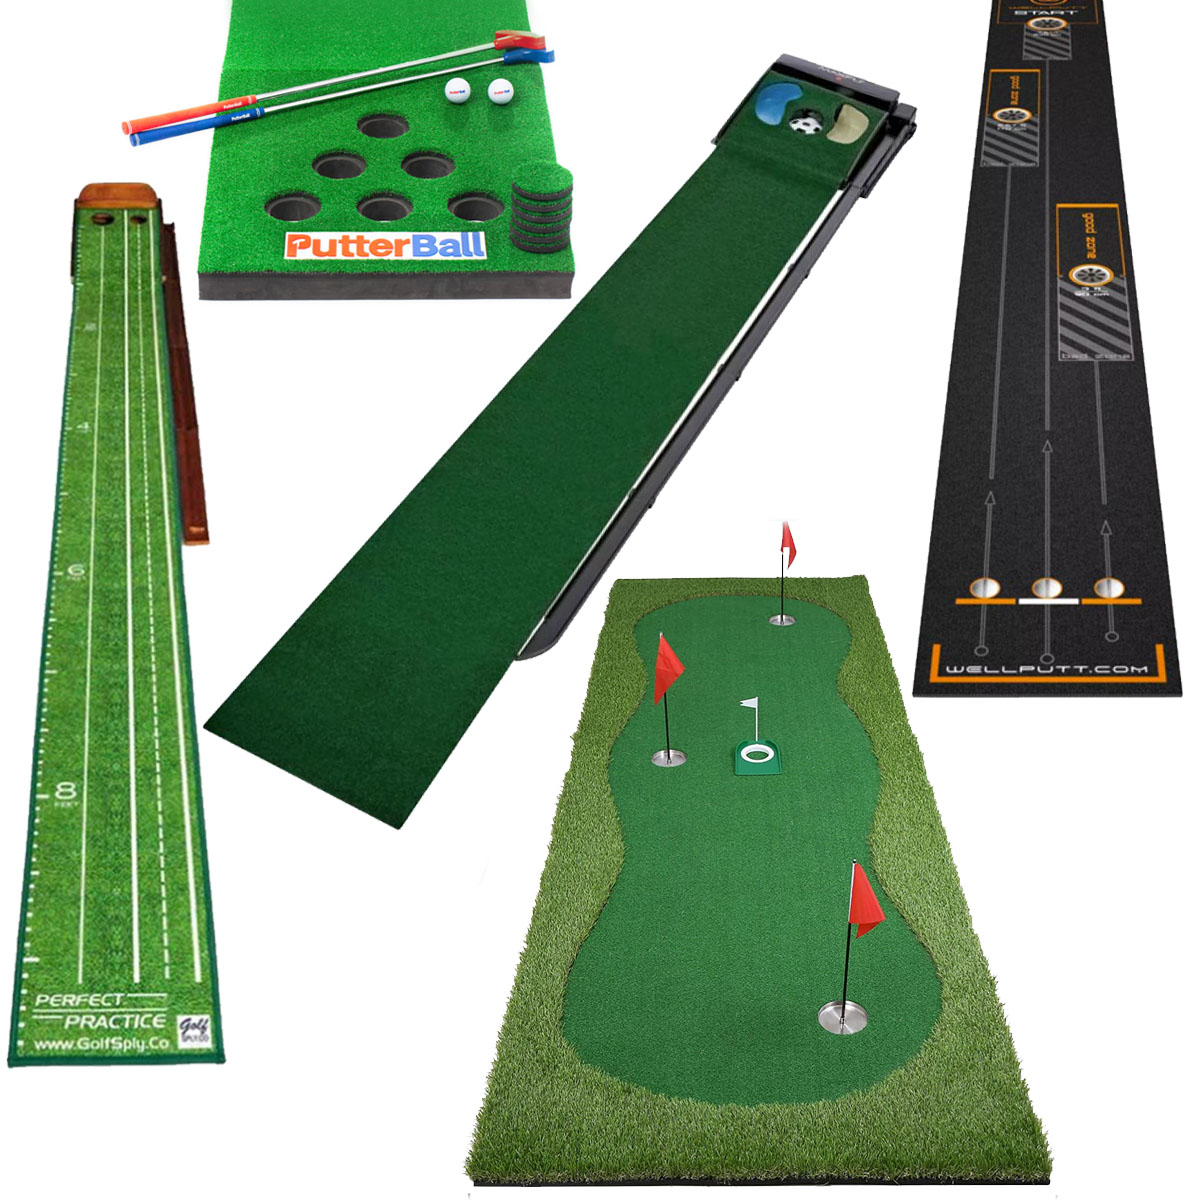 Prime Day Golf Deals: The best putting mats for at-home practice, Golf Equipment: Clubs, Balls, Bags